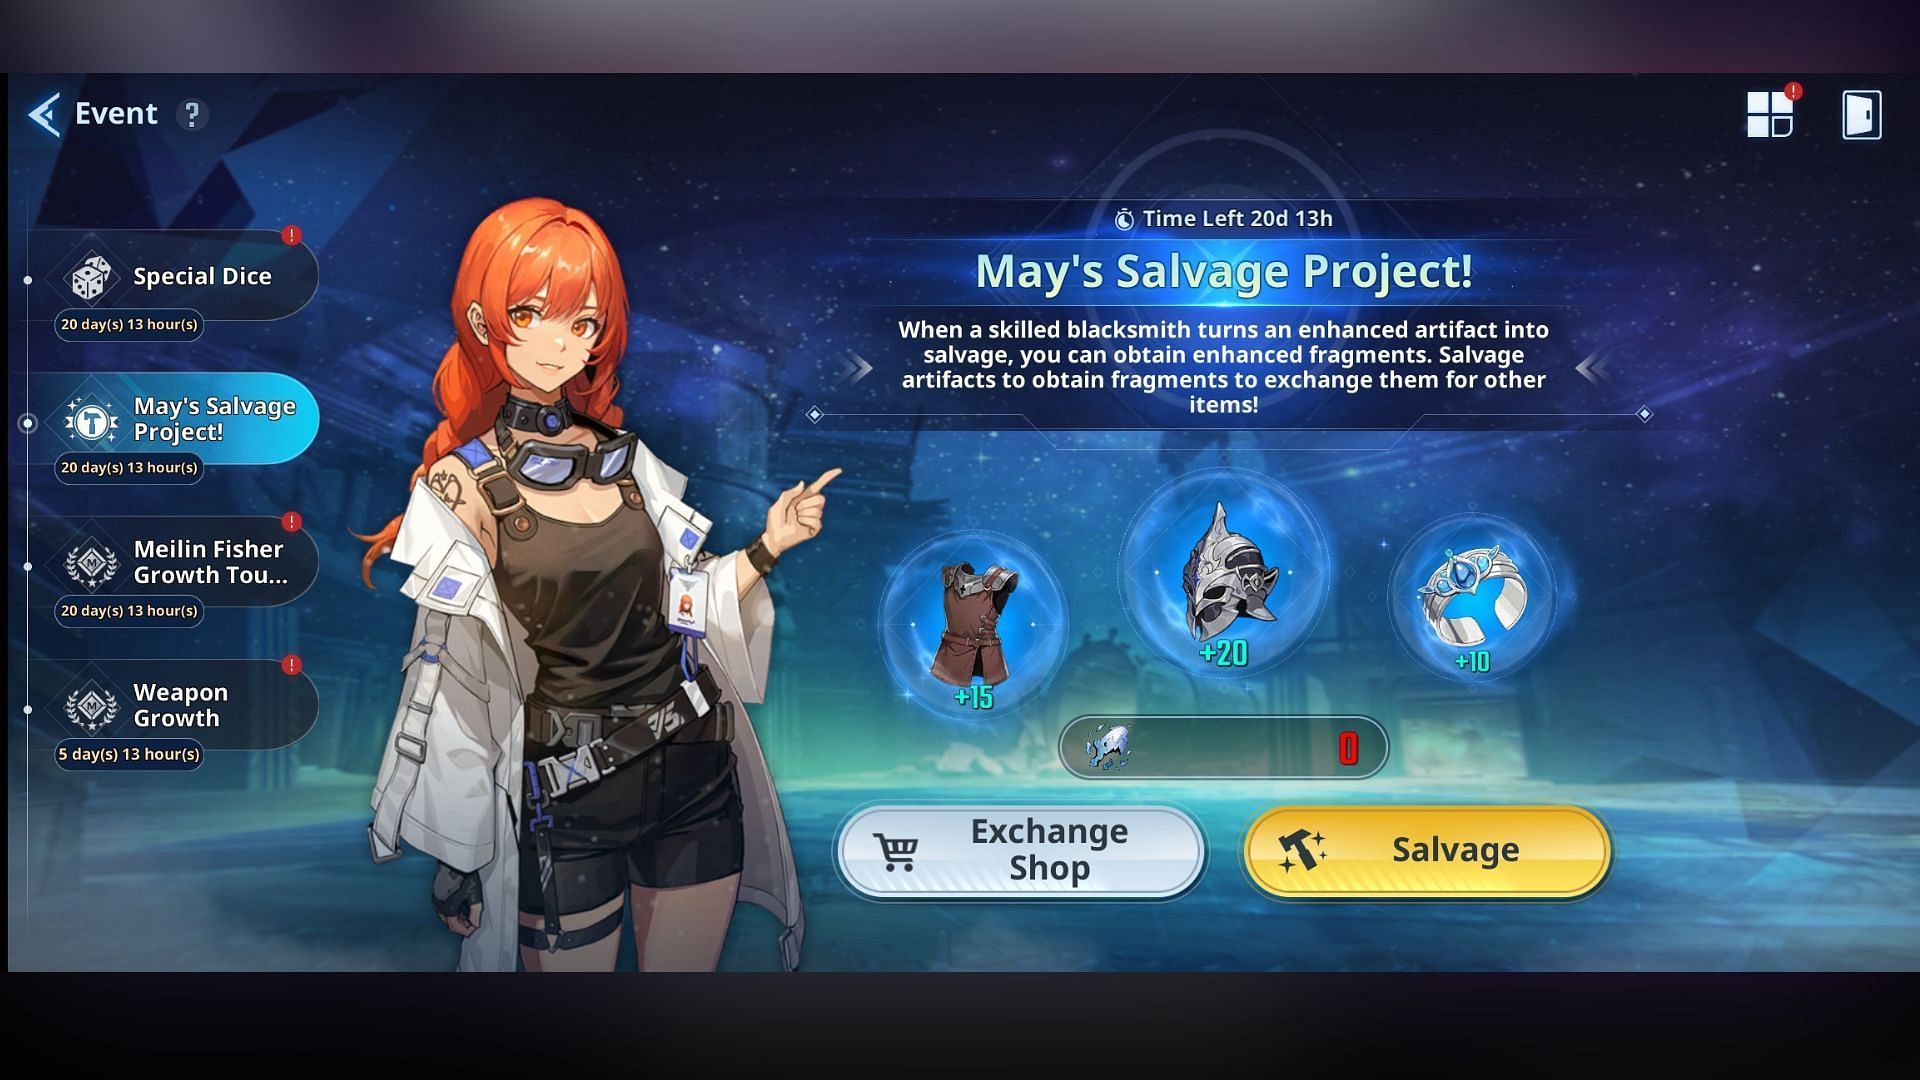 Players can get Mana Power Imbued Fragments by salvaging artifacts during the event period (Image via Netmarble)